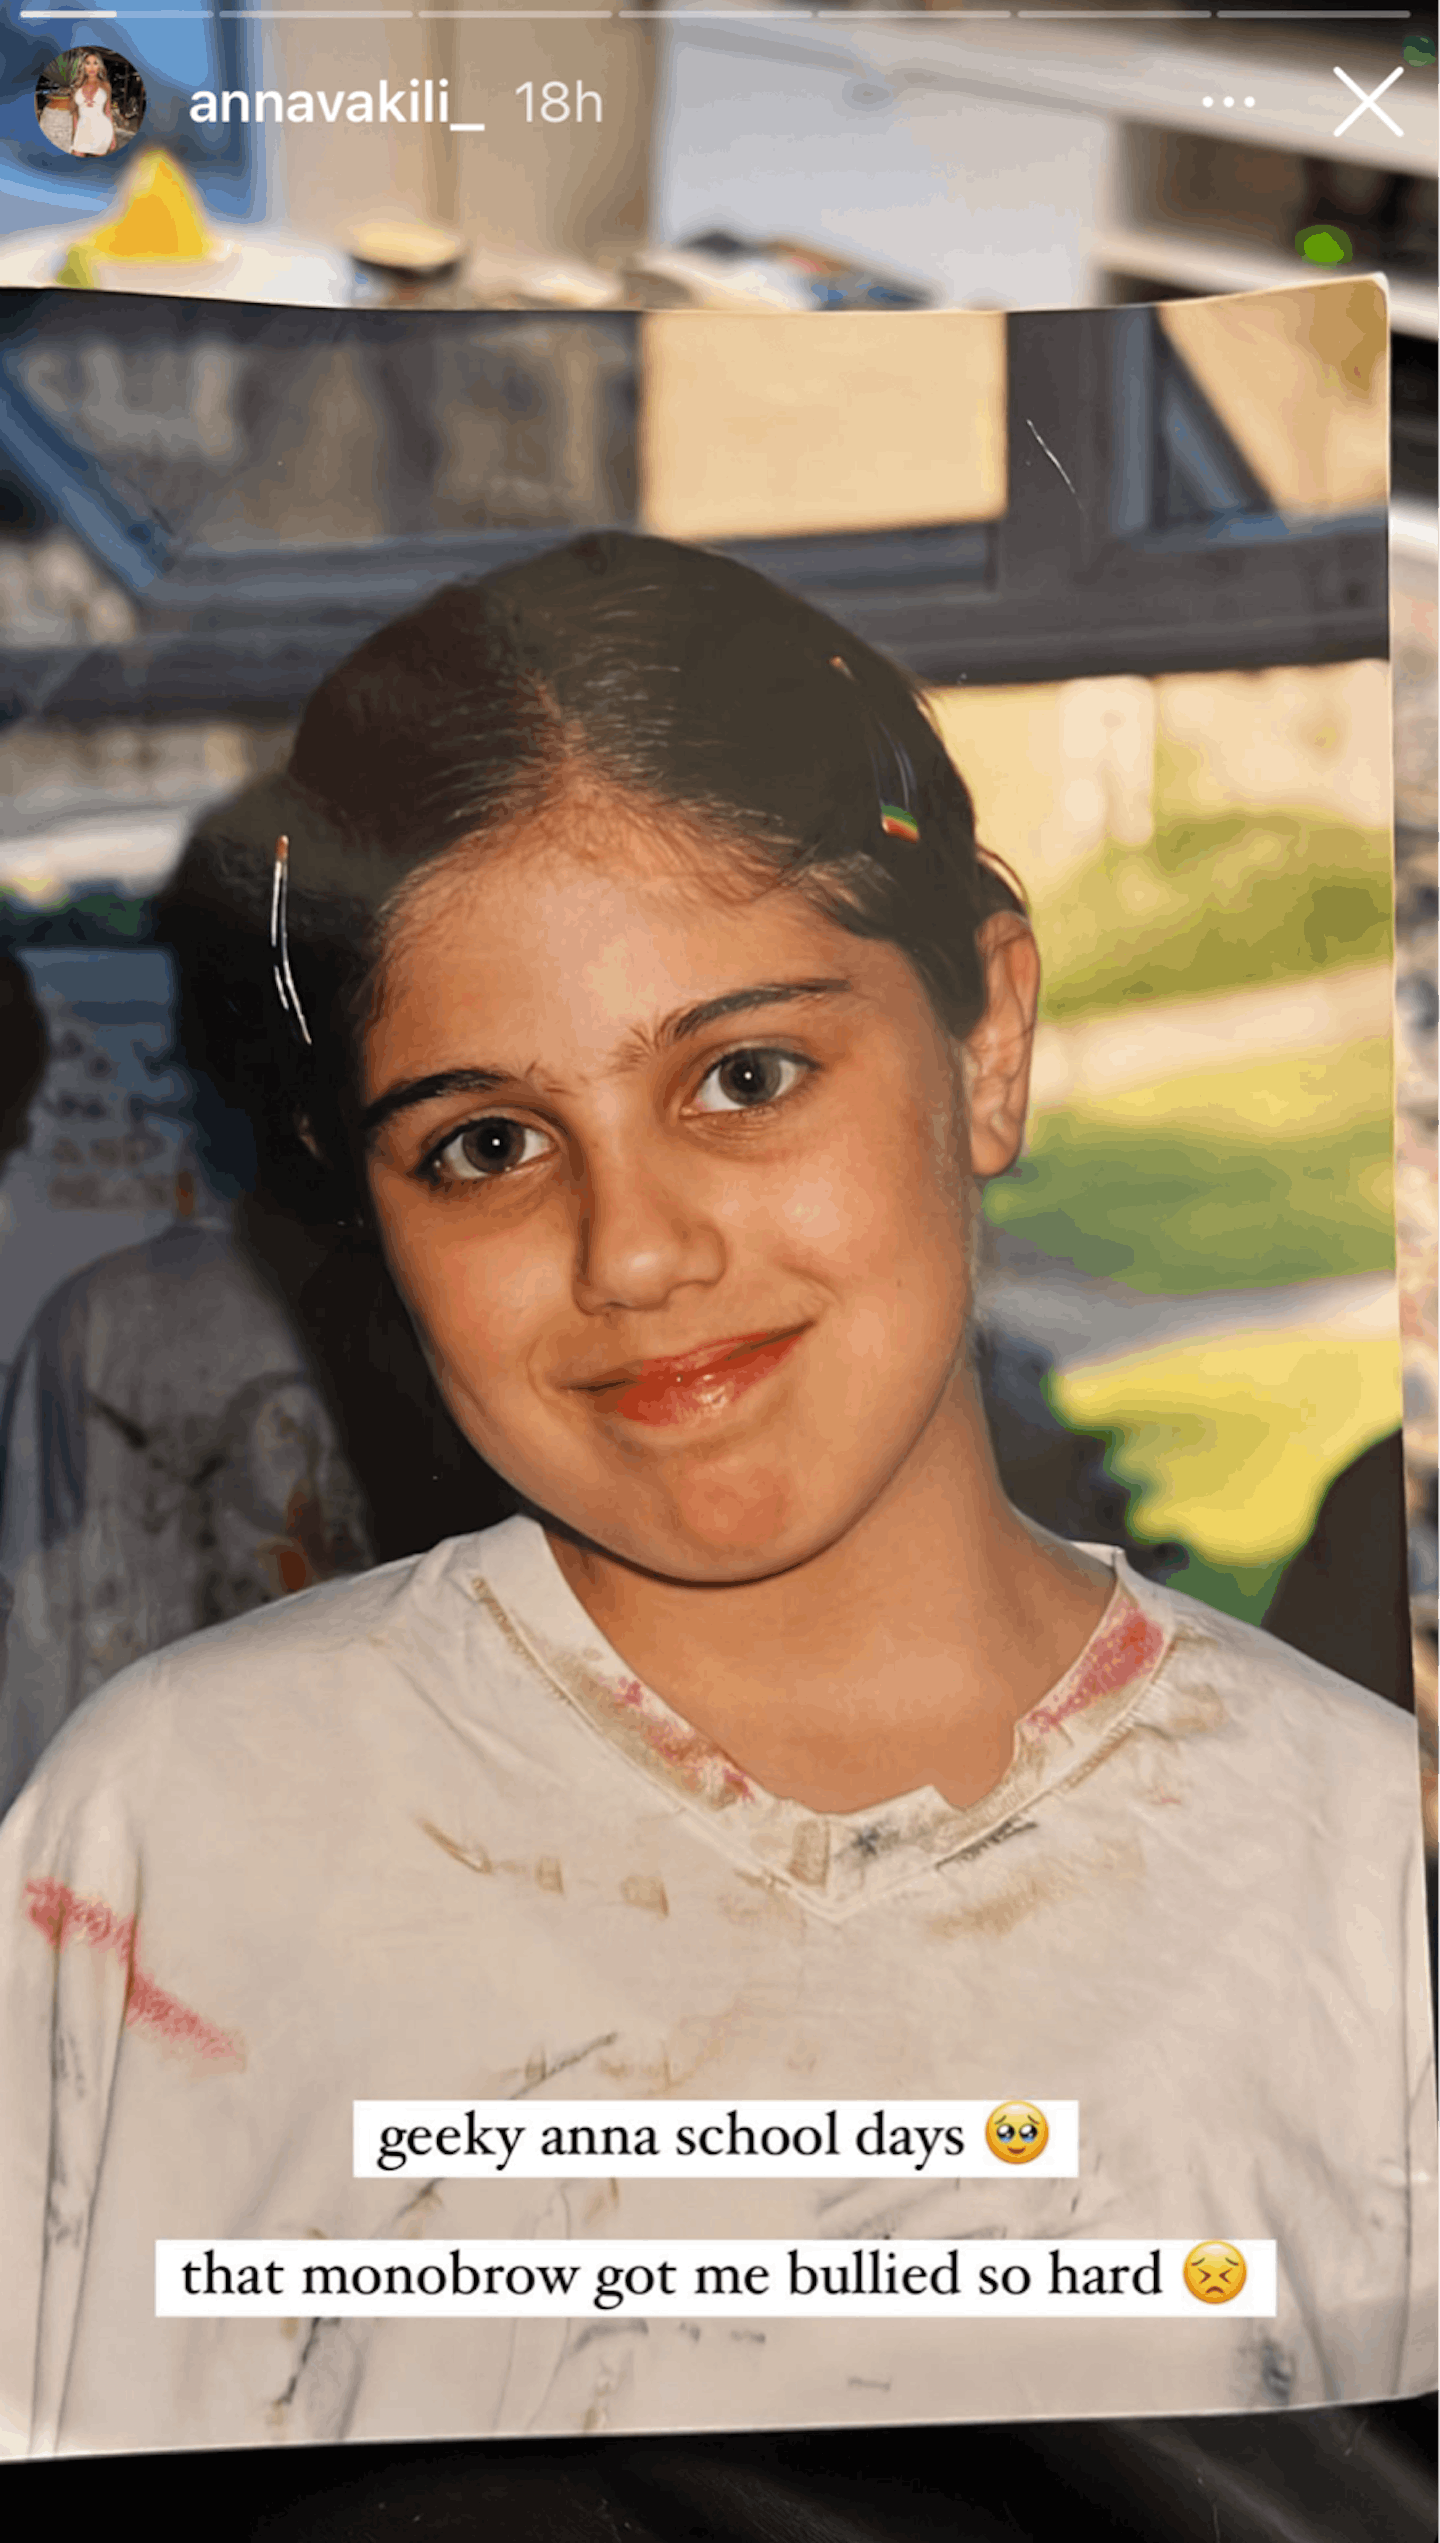 Anna Vakili's throwback photo of her as a child